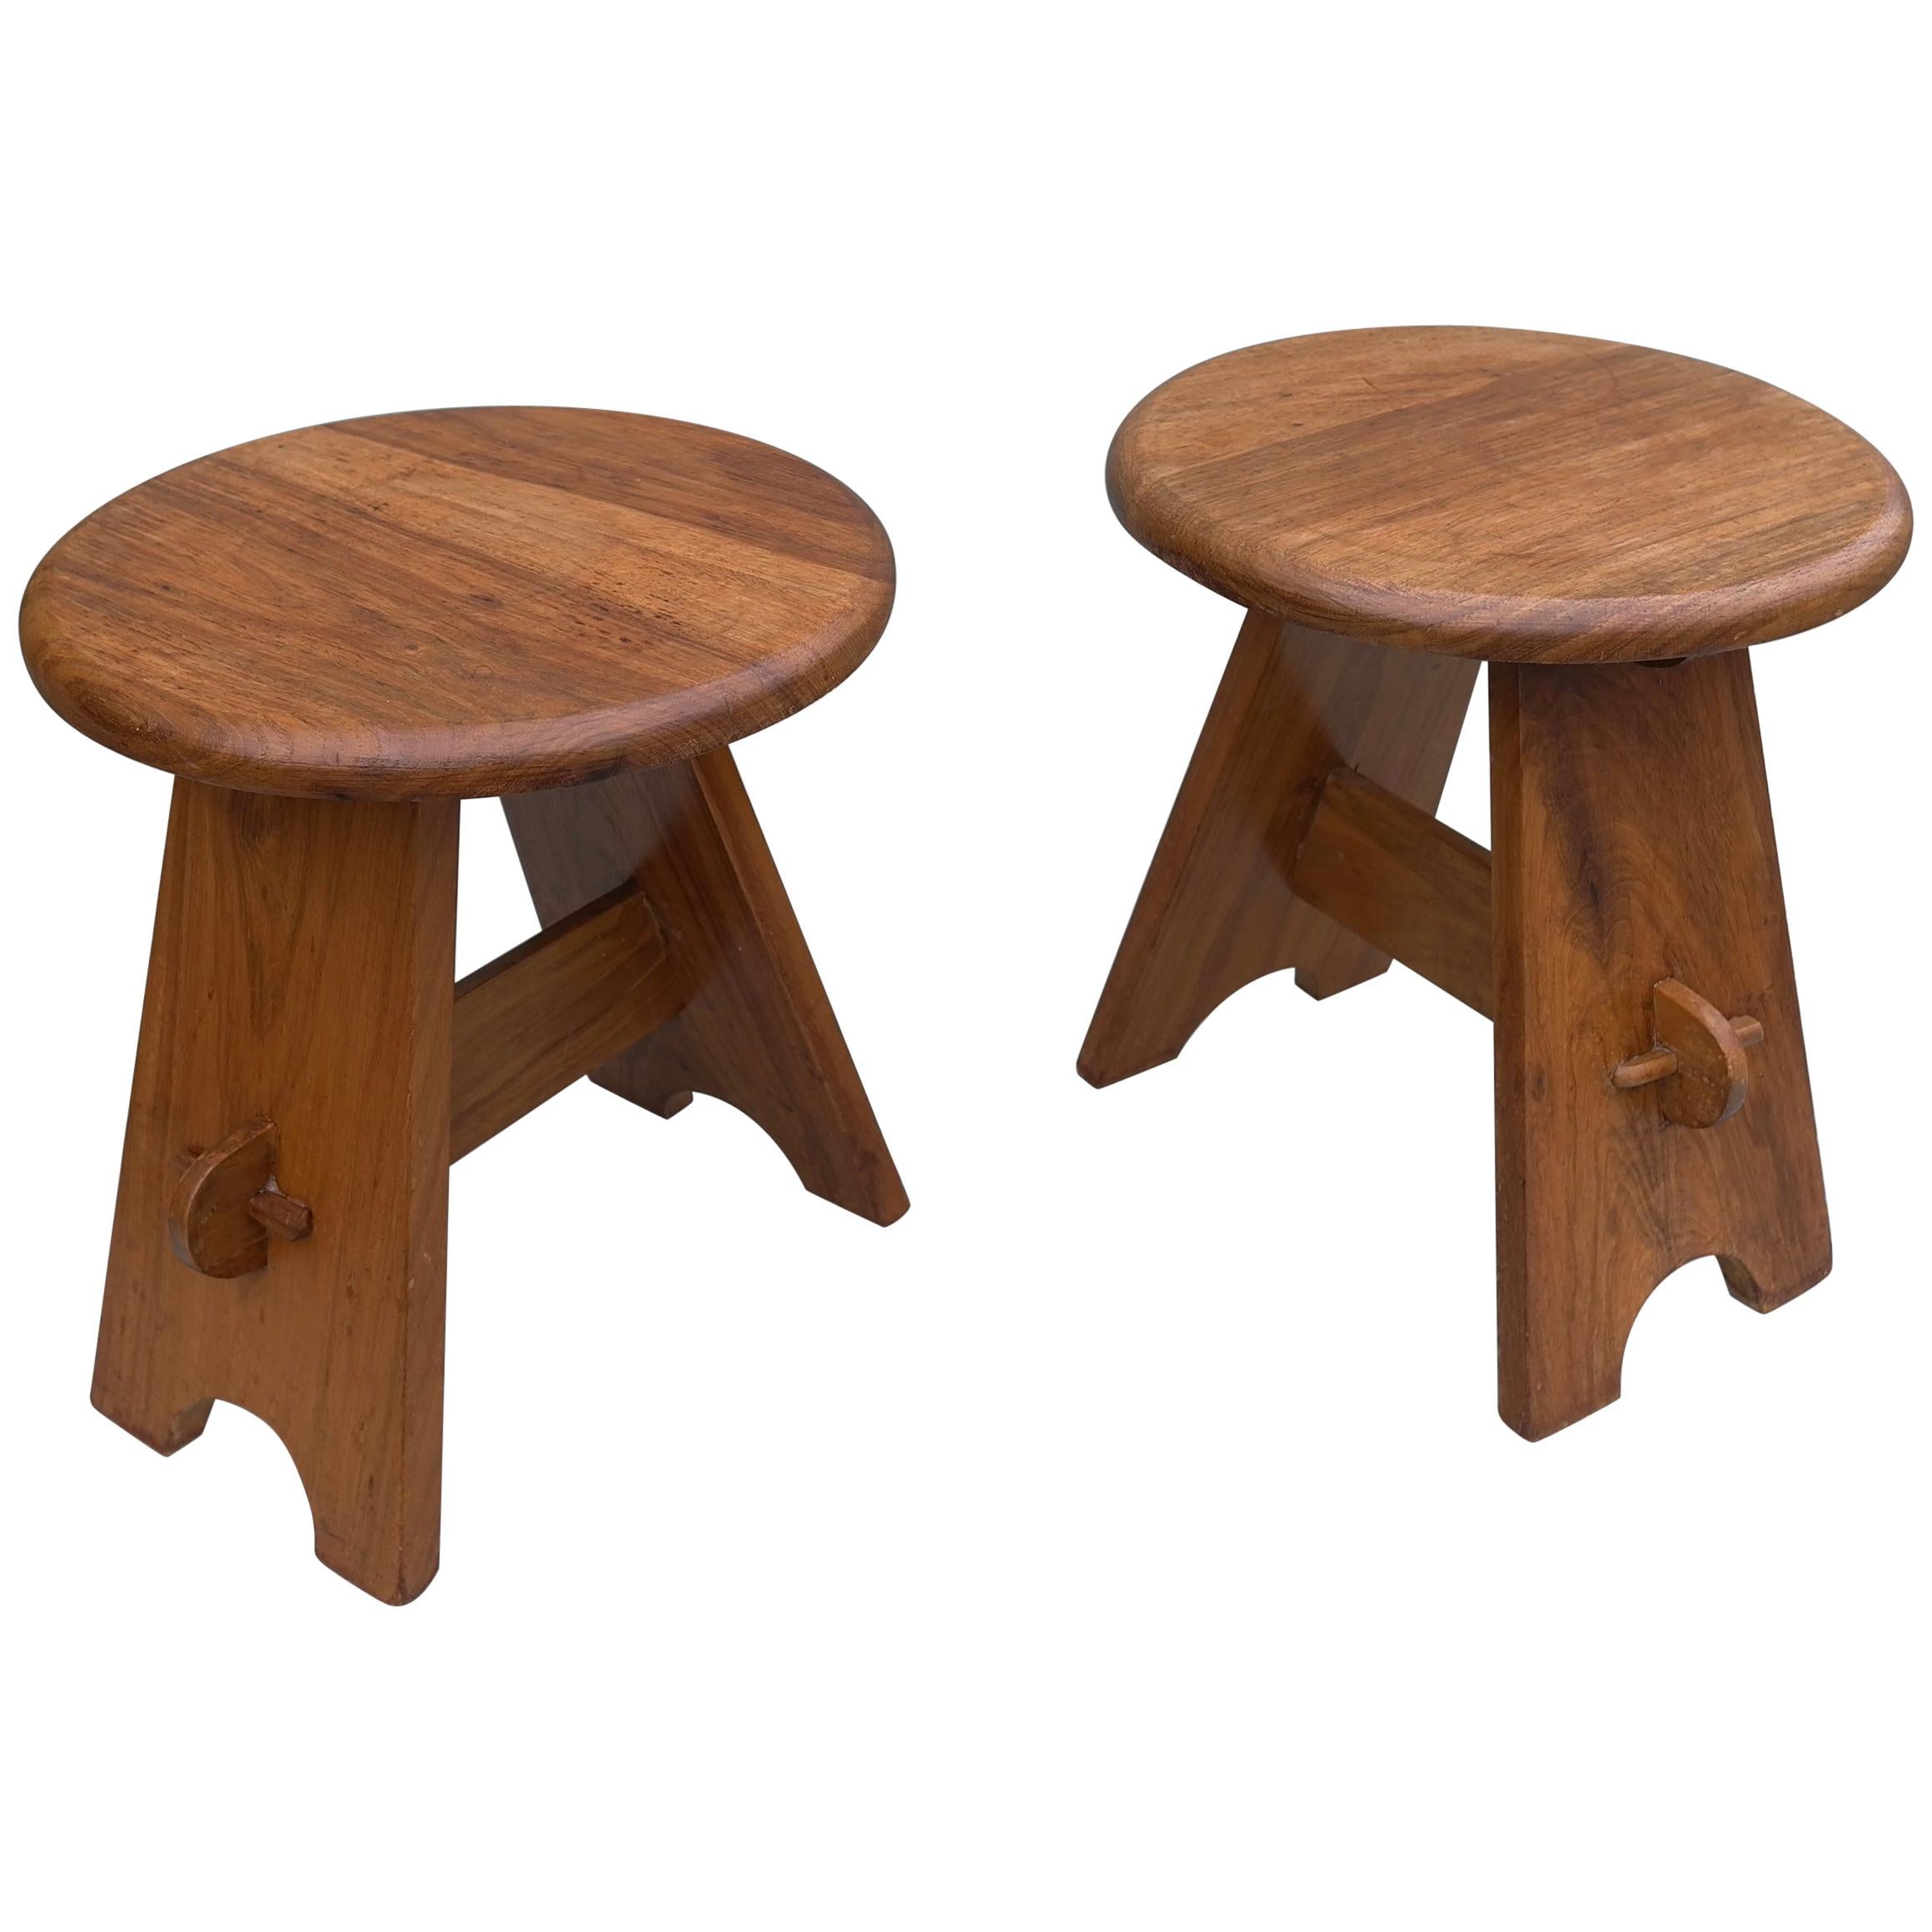 Pair of Midcentury Stools in Solid Elm Wood, France, 1950s For Sale